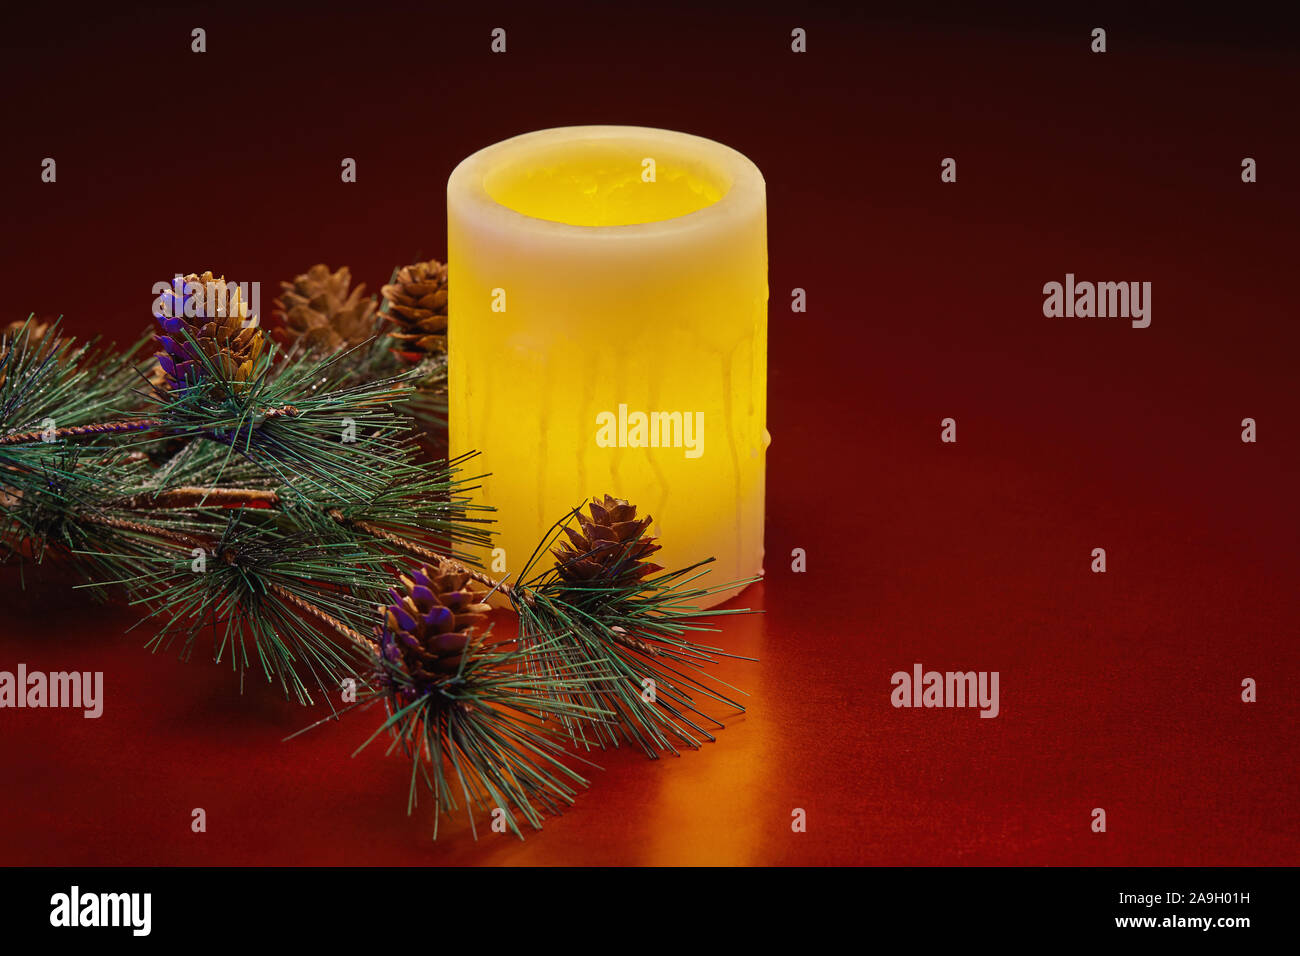 Winter holiday still life of glowing electric candle and a pine tree branch with pine cones Stock Photo